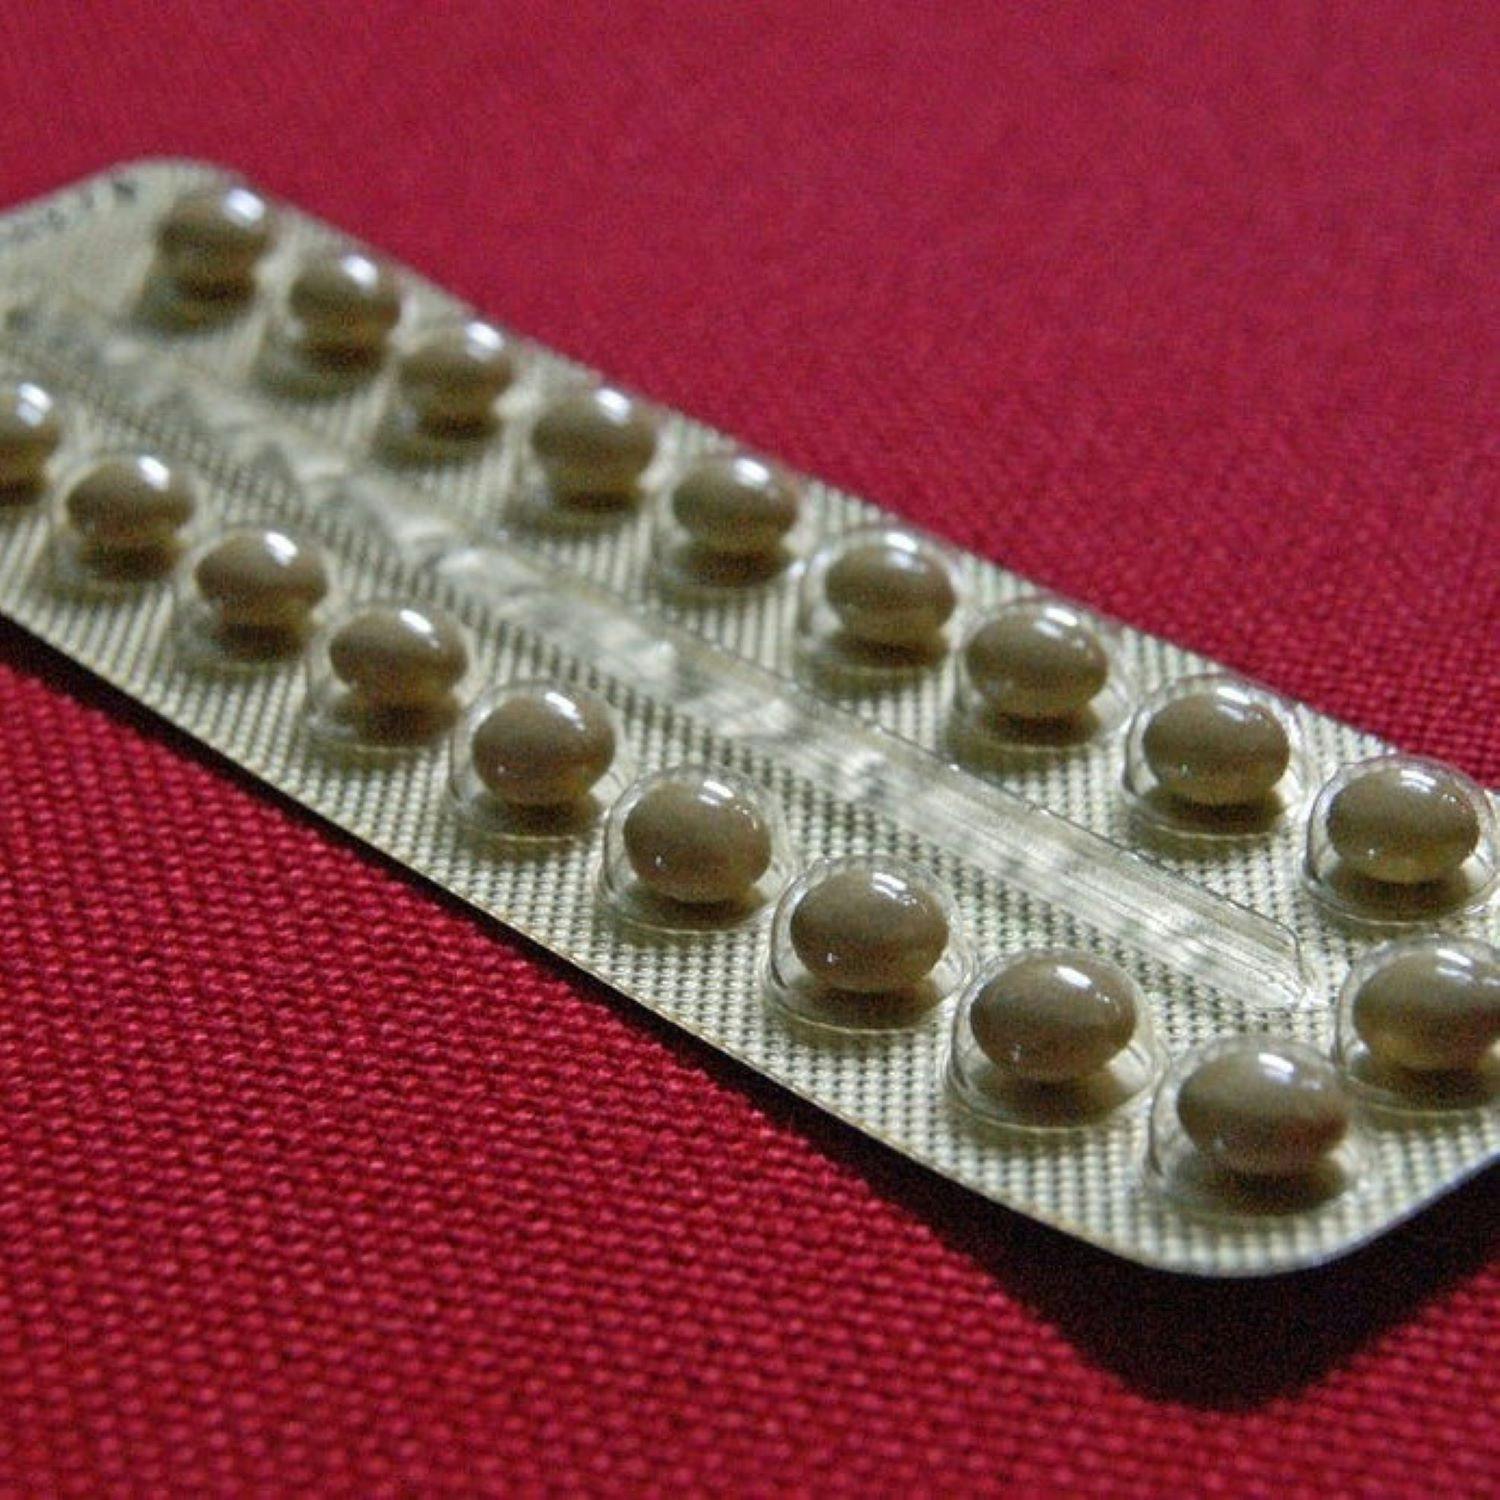 Listeners Speechless Over Parents Putting Their "Child" On The Pill